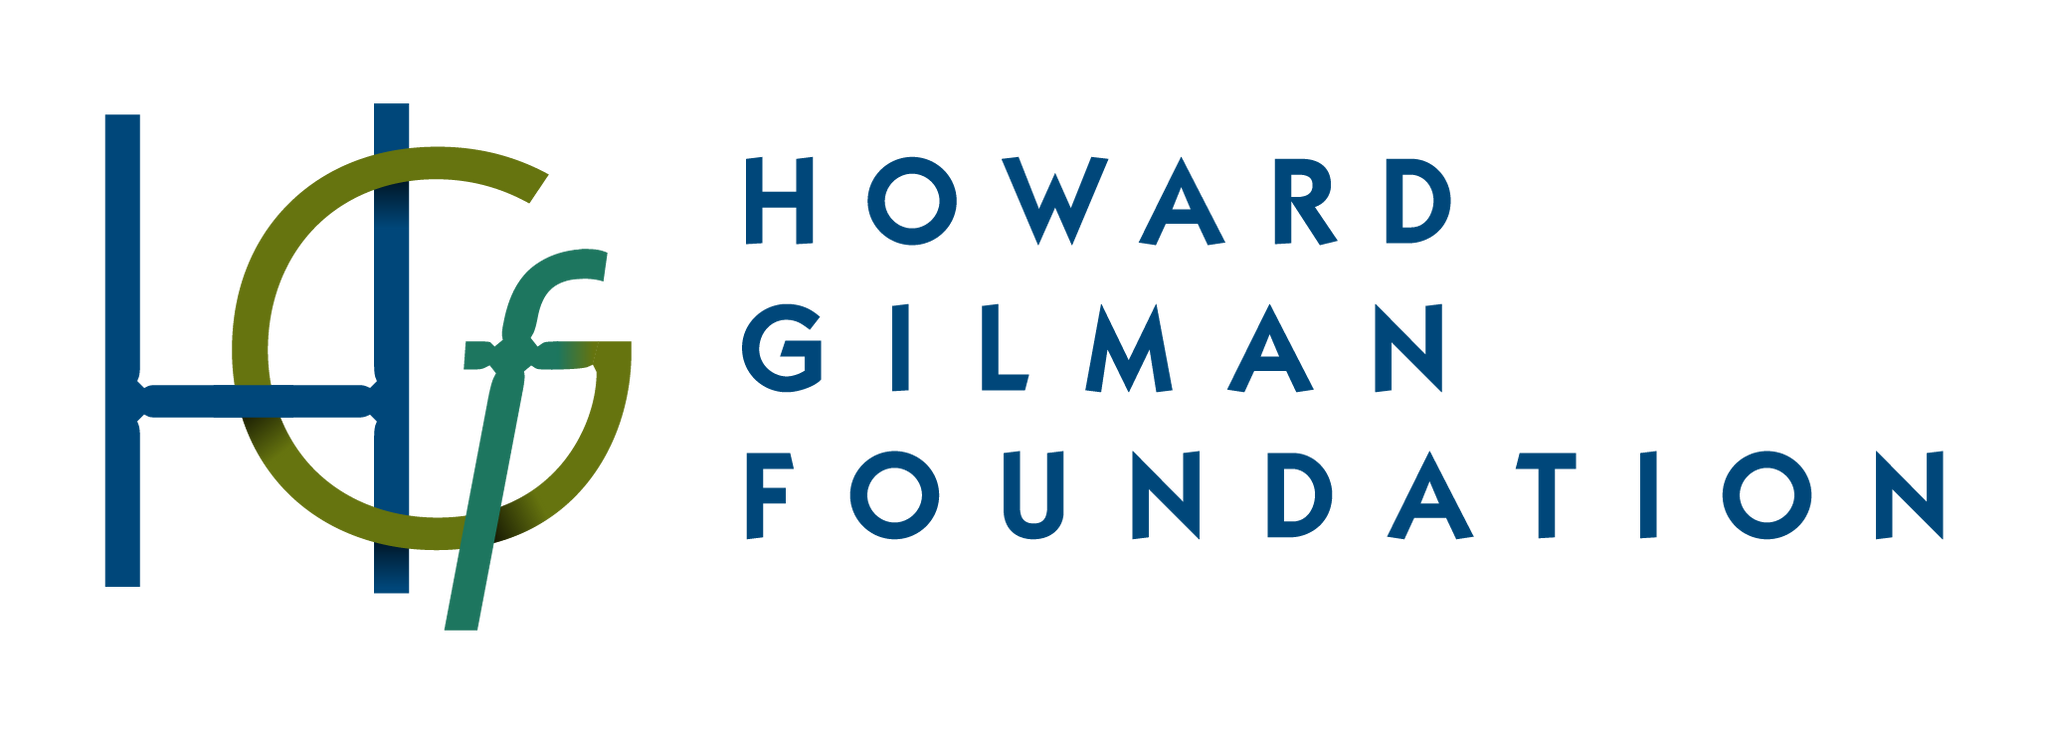 Howard Gilman Foundation logo, including the organization's name and interlocked initials H, G, and F